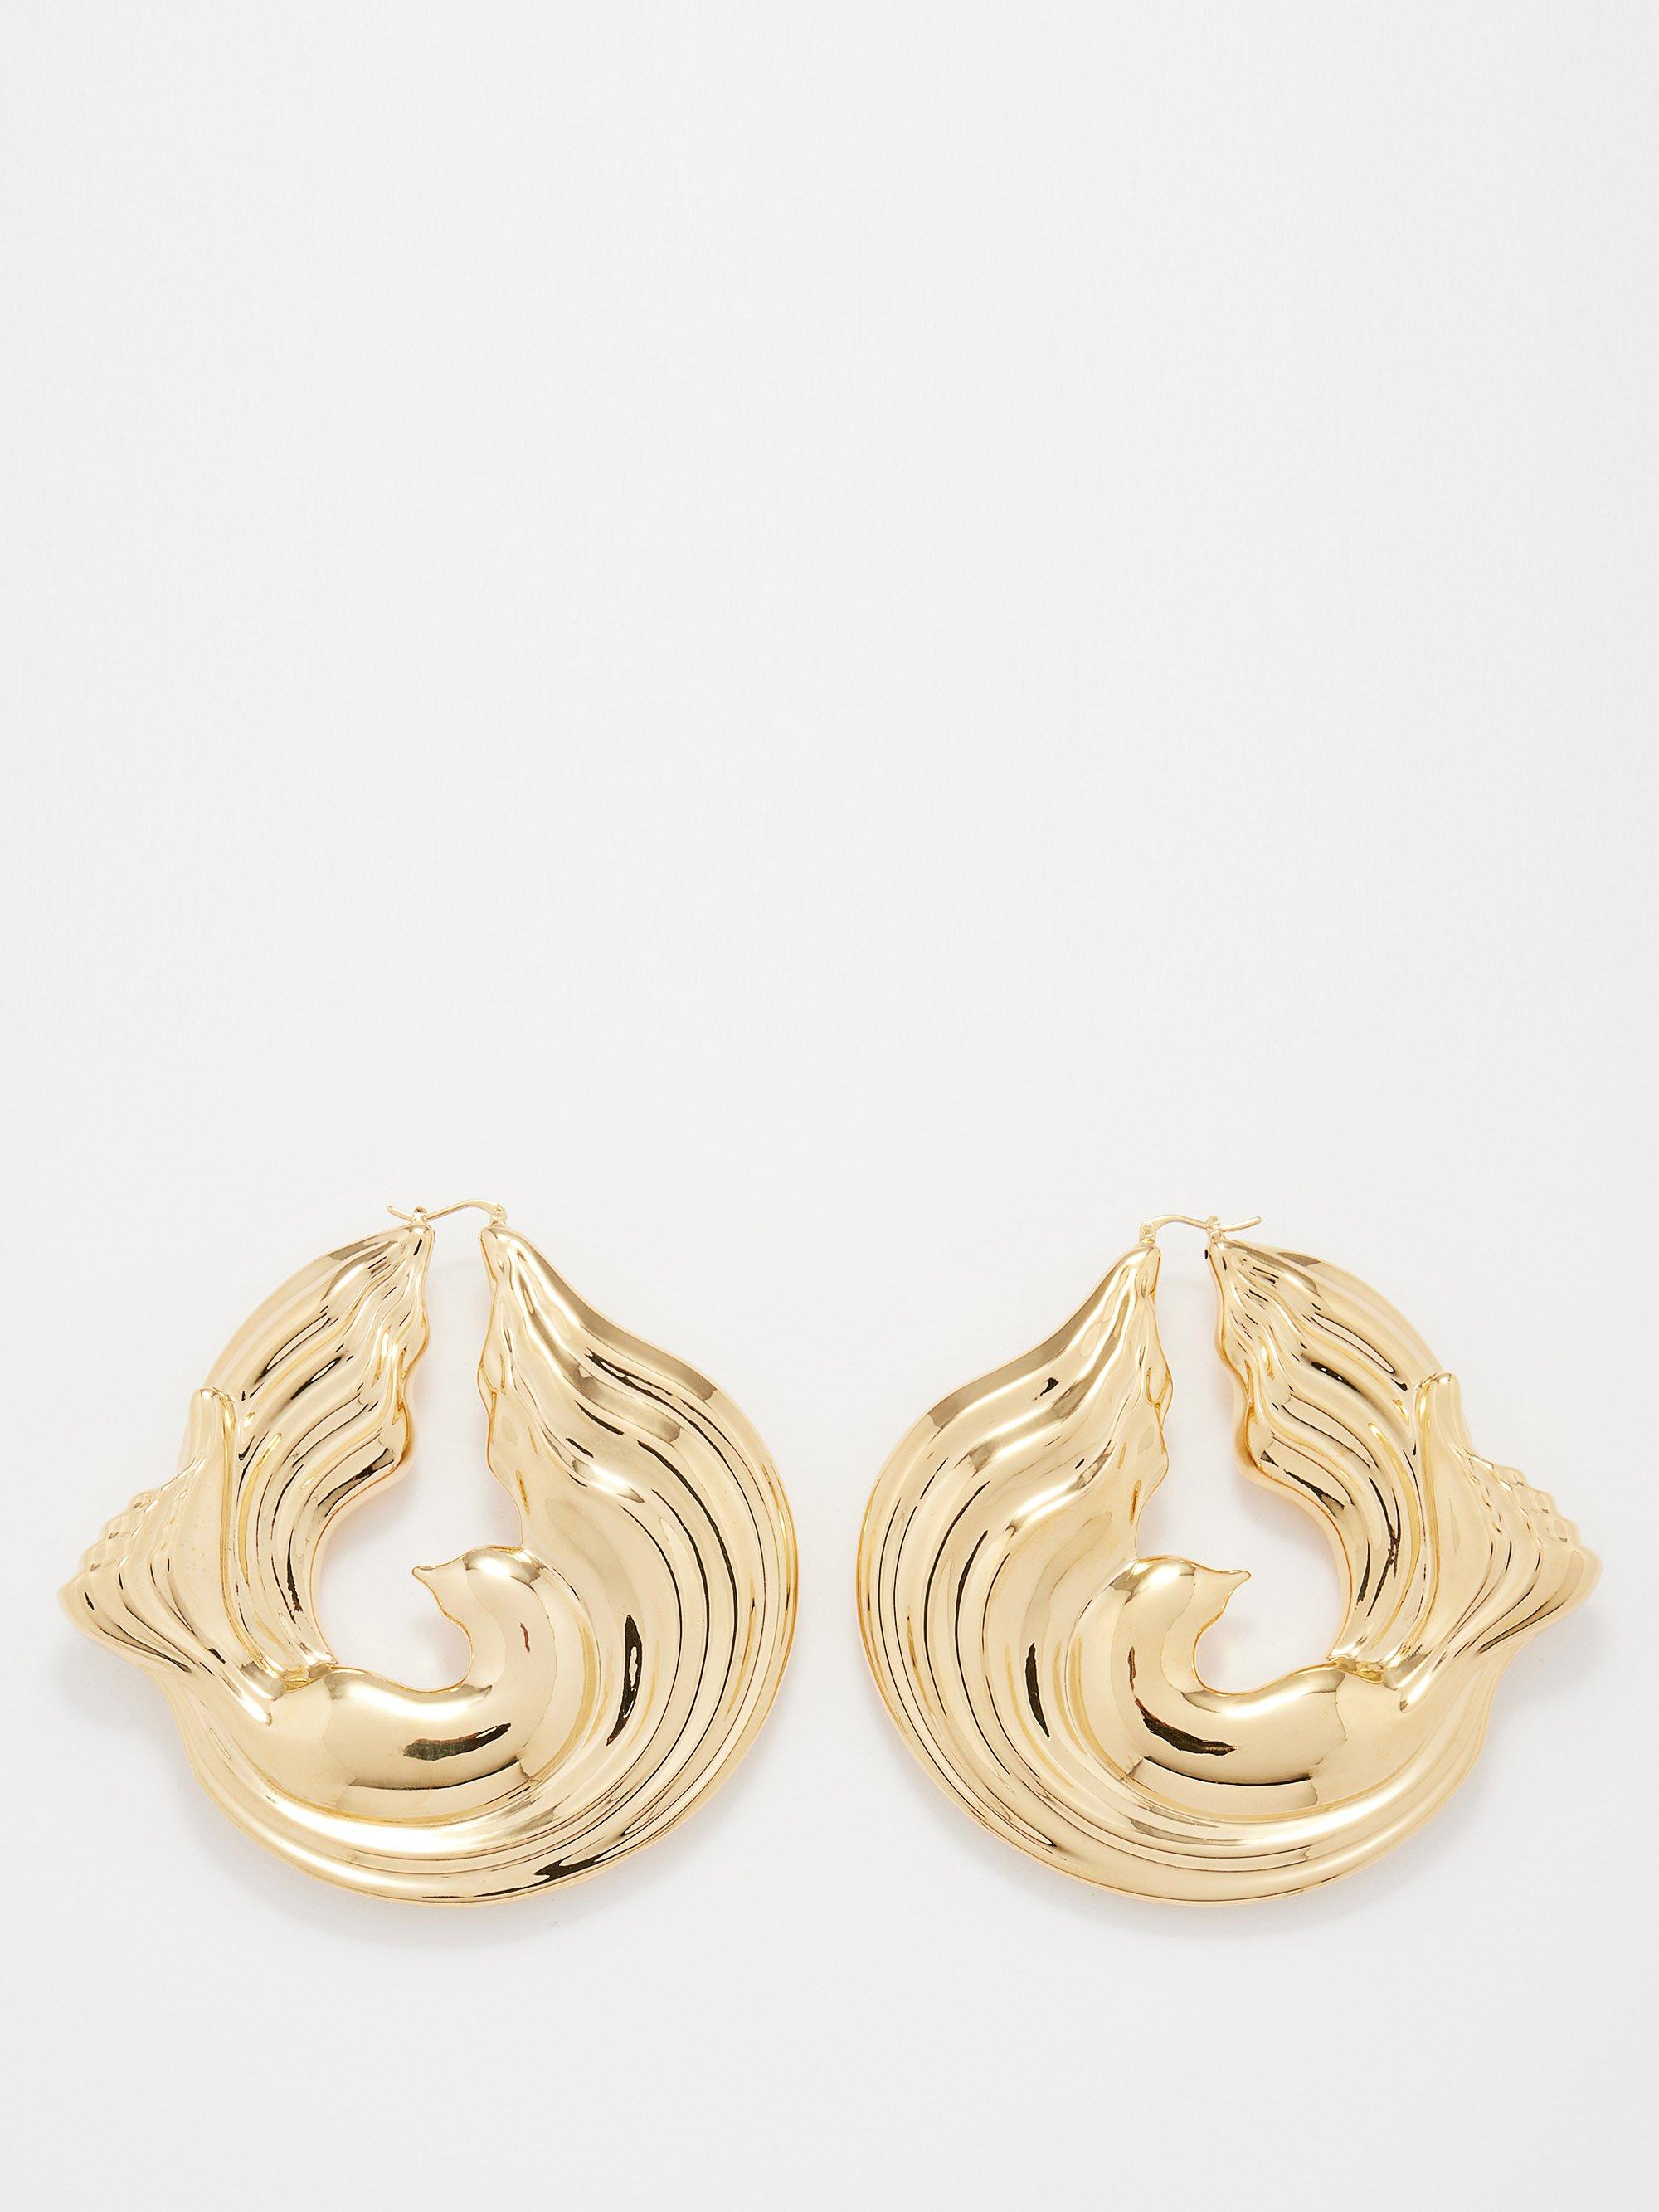 Nina Ricci Twisted Bird Gold-plated Hoop Earrings in Natural | Lyst